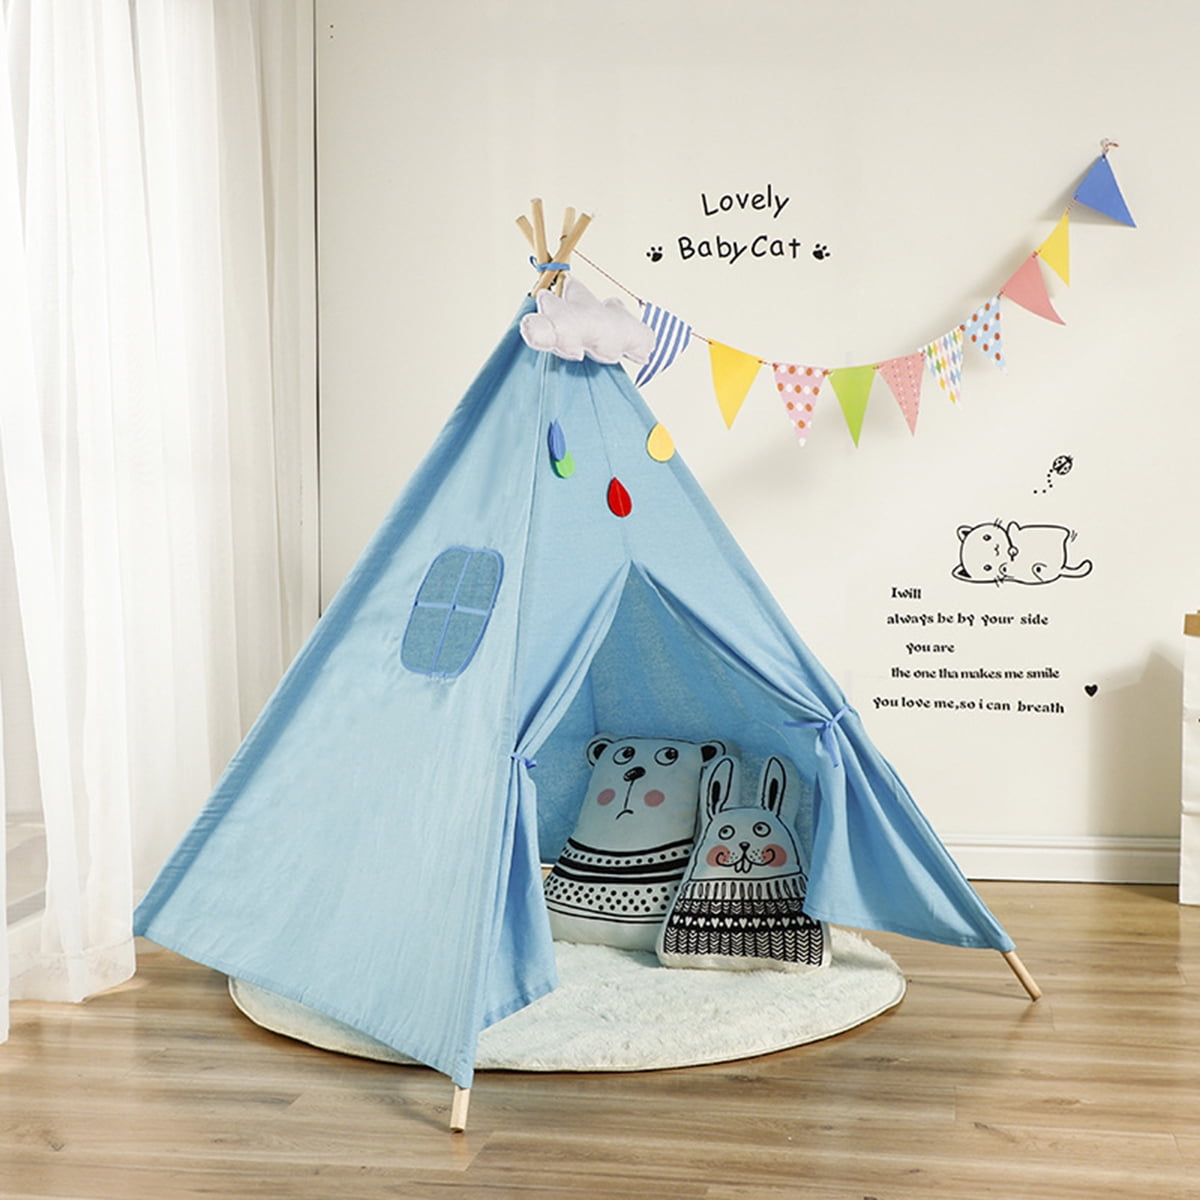 Cotton Canvas Kids Teepee Tent Childrens Wigwam Indoor Outdoor Play House Large 